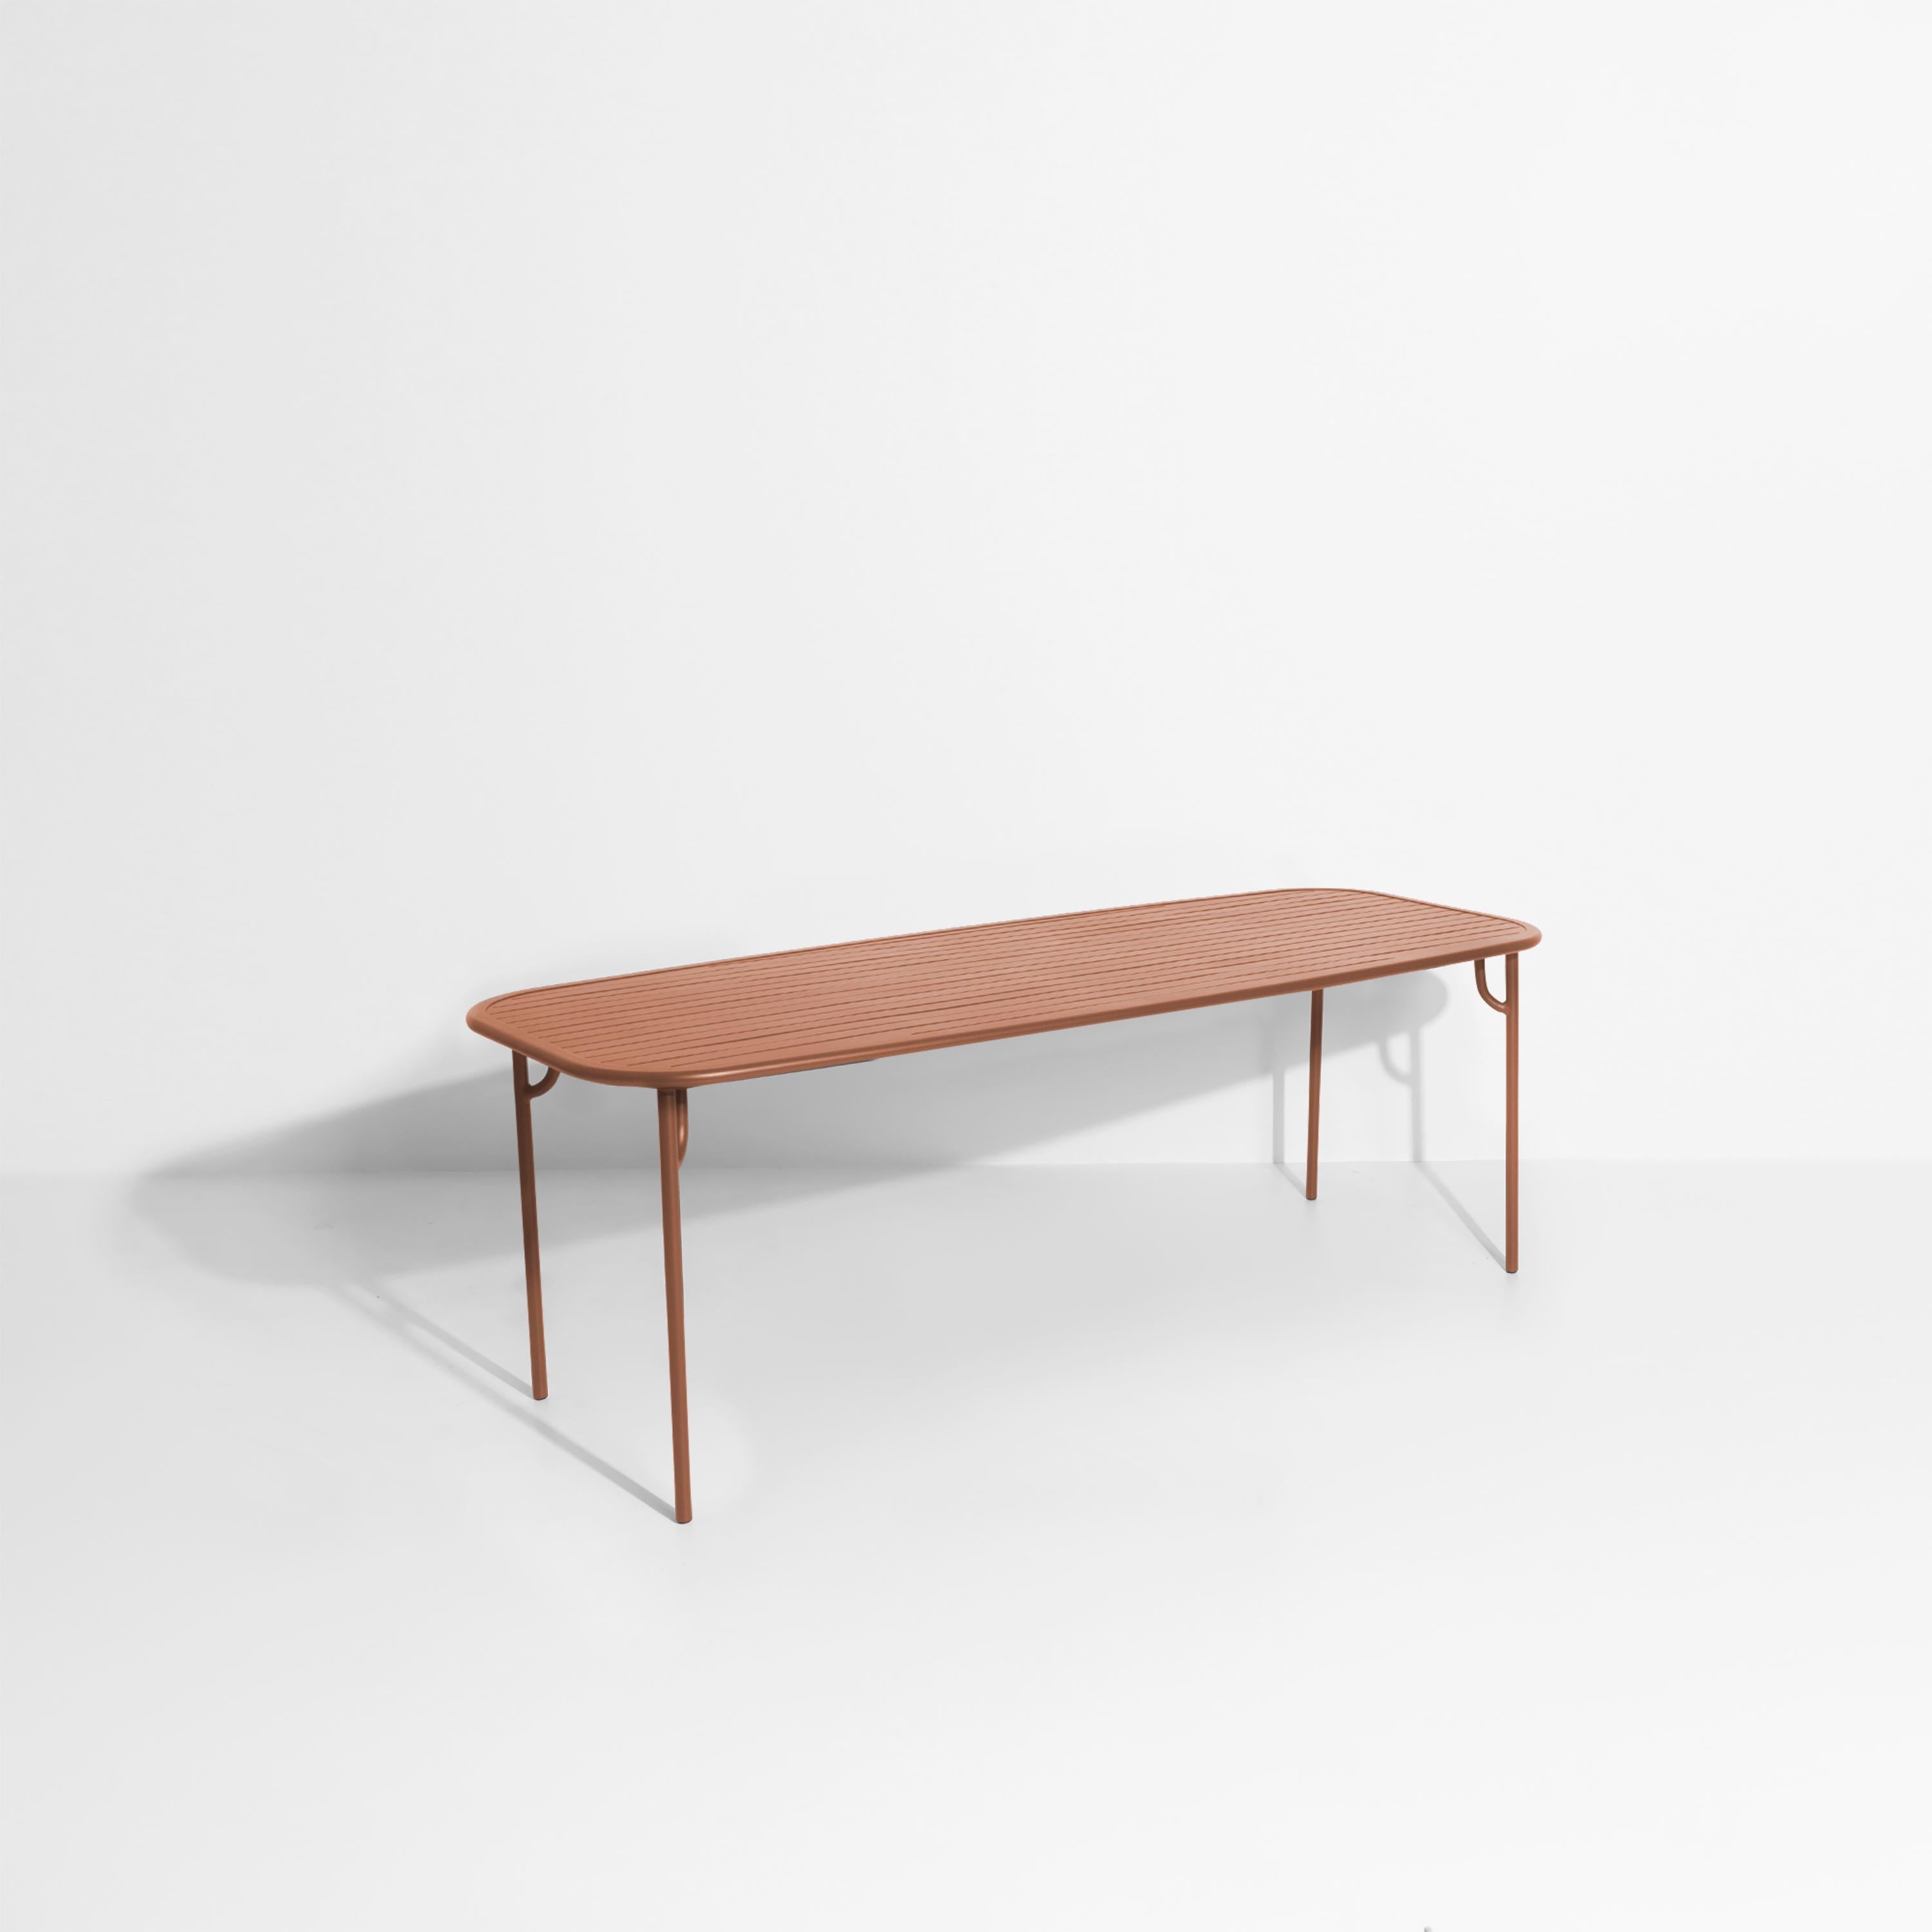 Petite Friture Week-End Large Rectangular Dining Table in Terracotta Aluminium with Slats by Studio BrichetZiegler, 2017

The week-end collection is a full range of outdoor furniture, in aluminium grained epoxy paint, matt finish, that includes 18